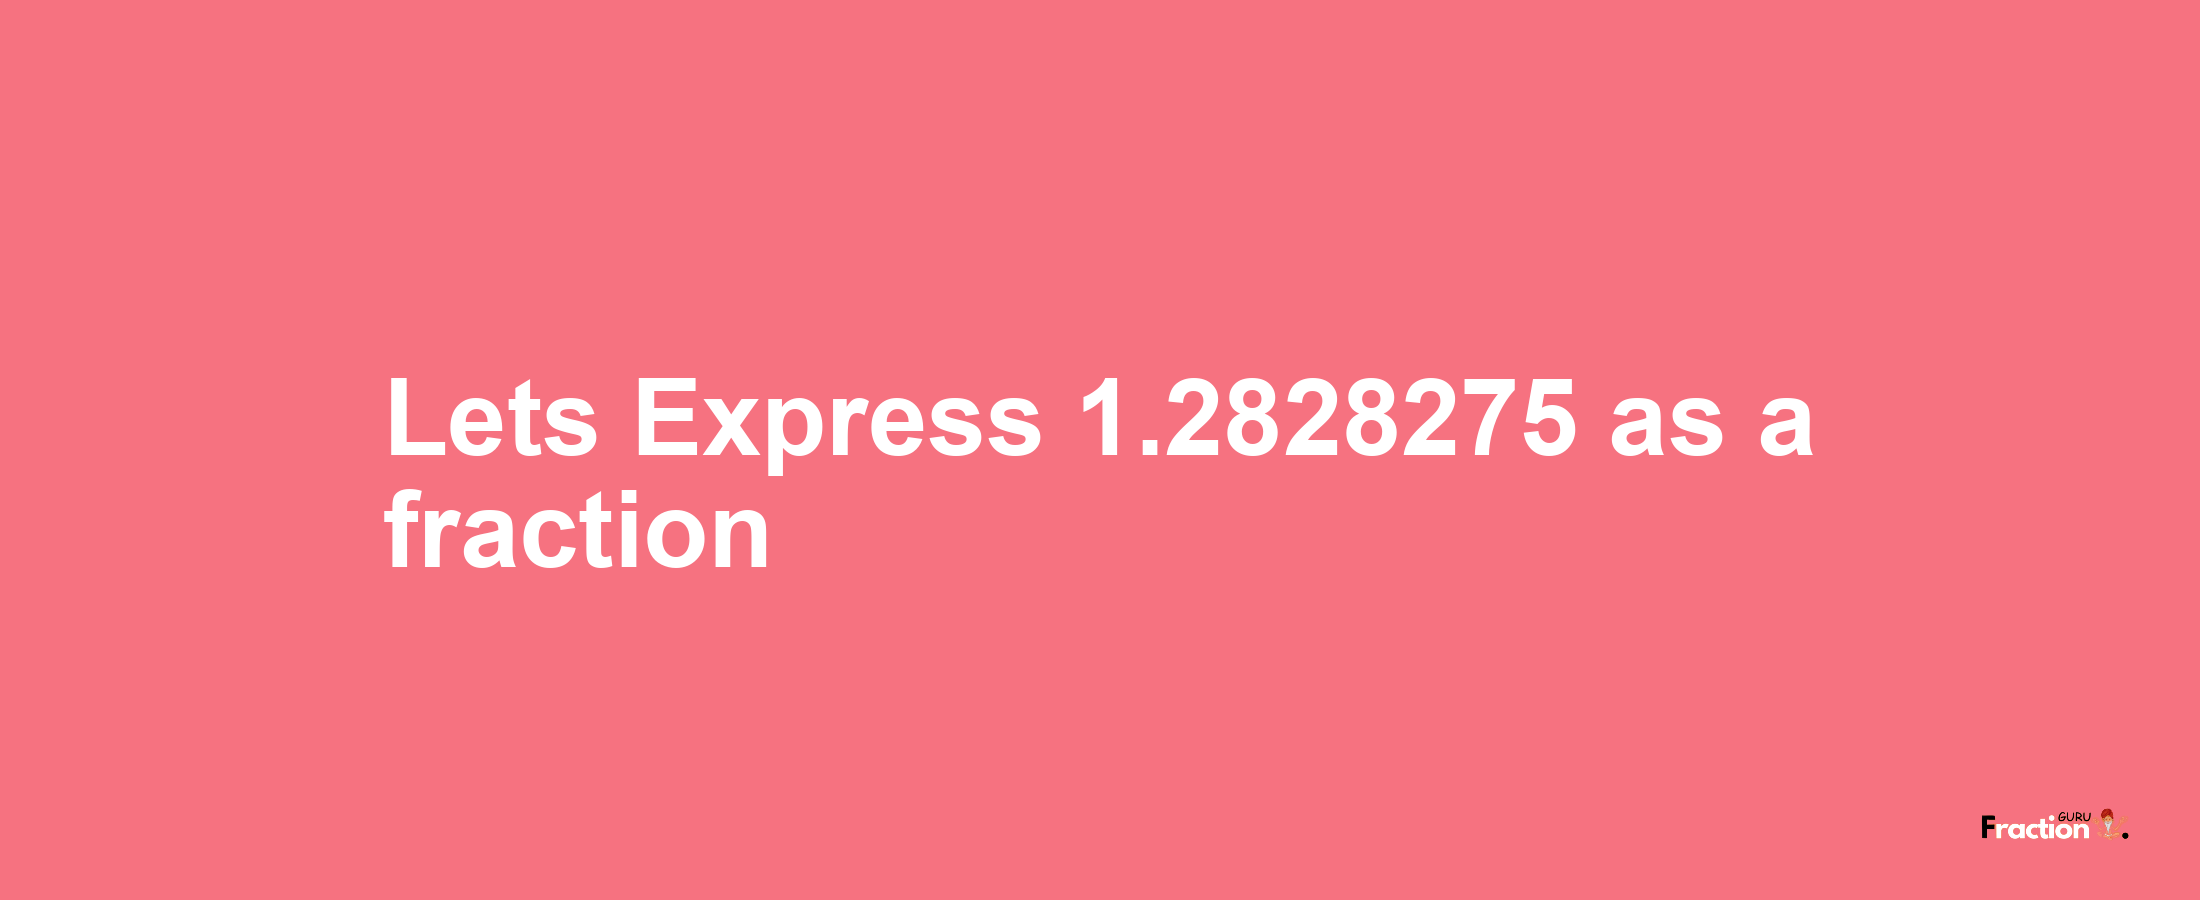 Lets Express 1.2828275 as afraction